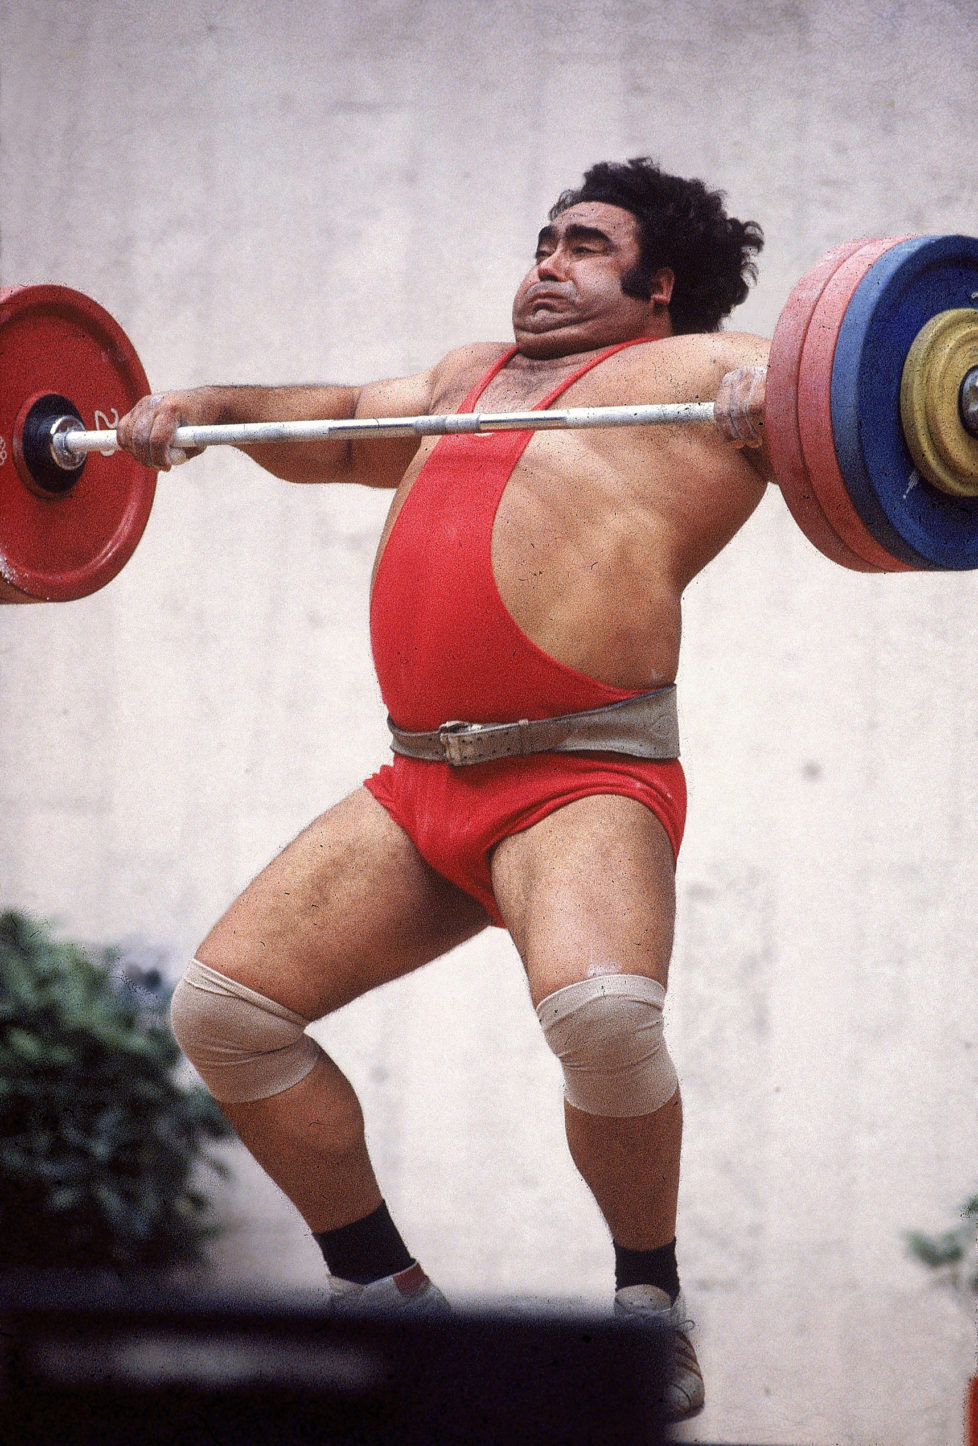 UNSPECIFIED - JULY 19: Weightlifting: 1980 Summer Olympics, USR Vasily Alexeyev in action during +242,5 lb event, Moscow, USR 7/19/1980--8/3/1980 (Photo by Jerry Cooke/Sports Illustrated/Getty Images) (SetNumber: X24706 TK7 R6 F17)